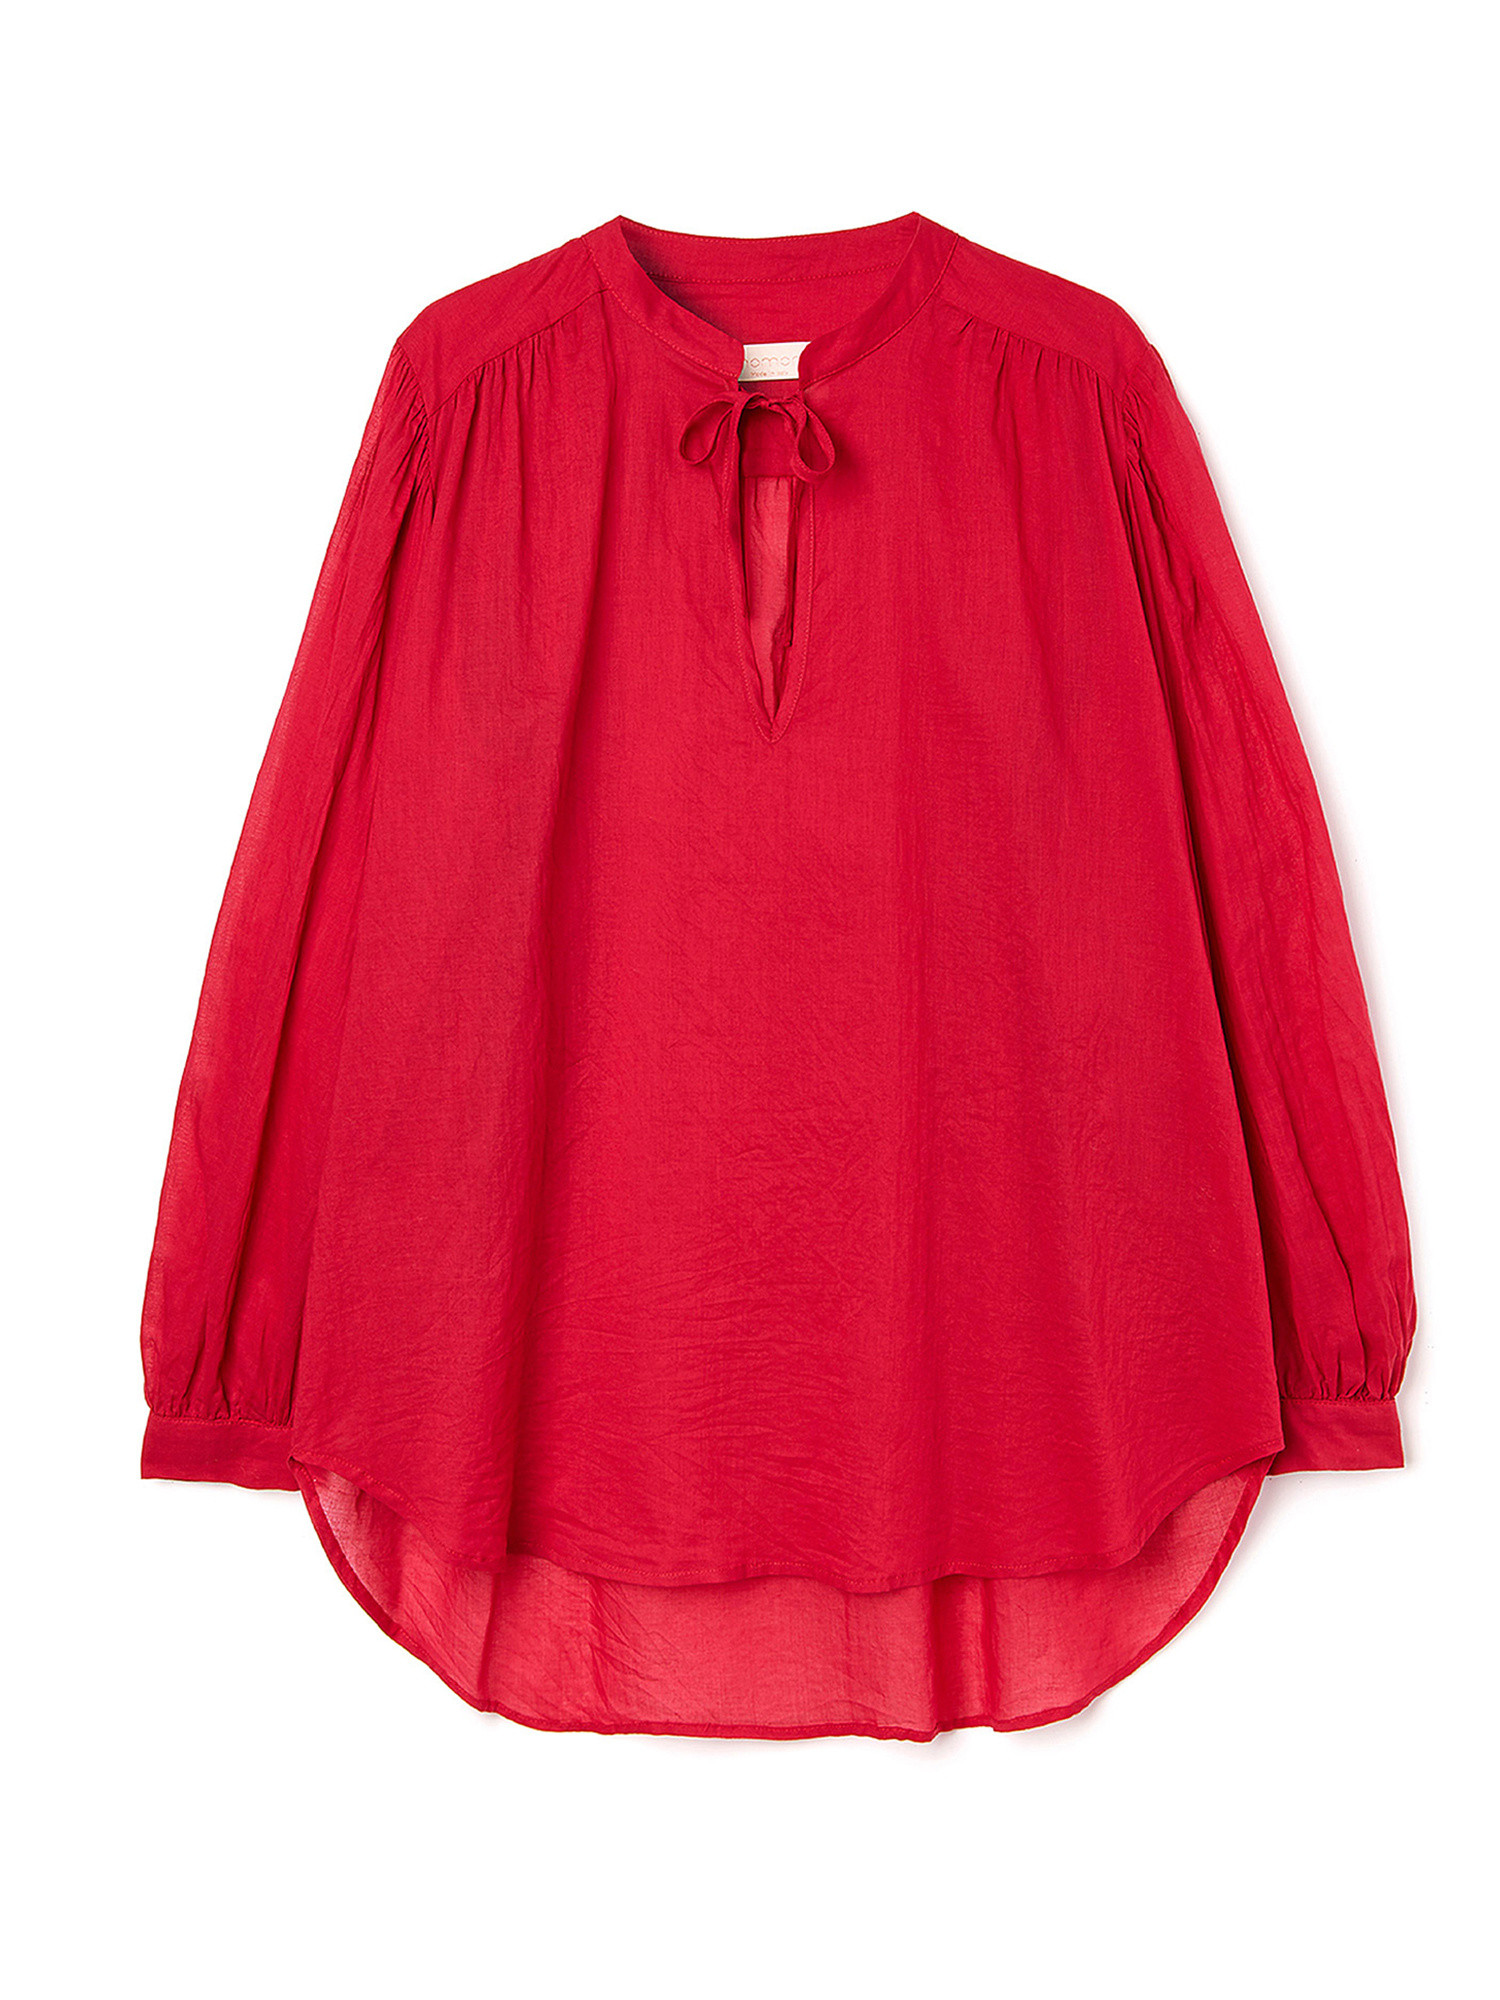 Blusa Kansas in voile di cotone, Rosso, large image number 0